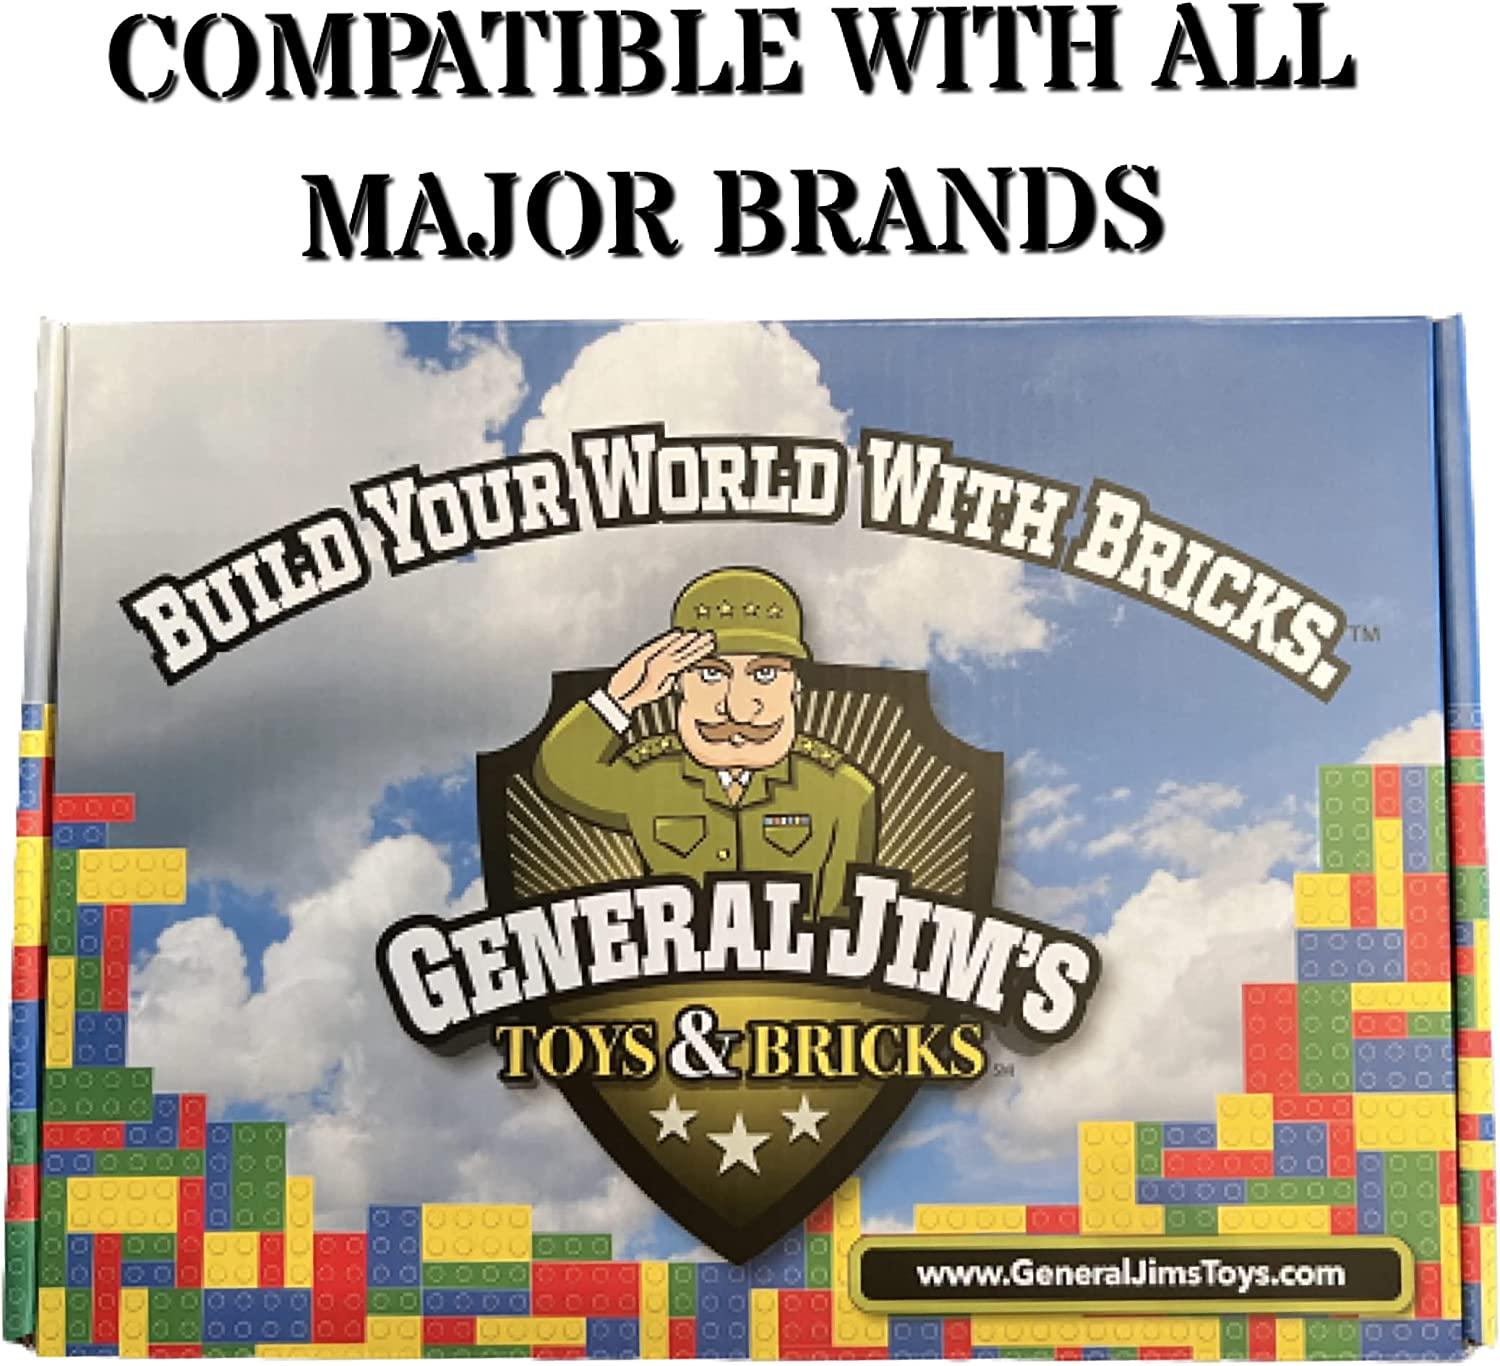 General Jim's, General Jim's Architectural City Creator Expert Downtown BBQ Diner Restaurant Building Blocks Toy Kit Set for Kids and Adults - Building Houses